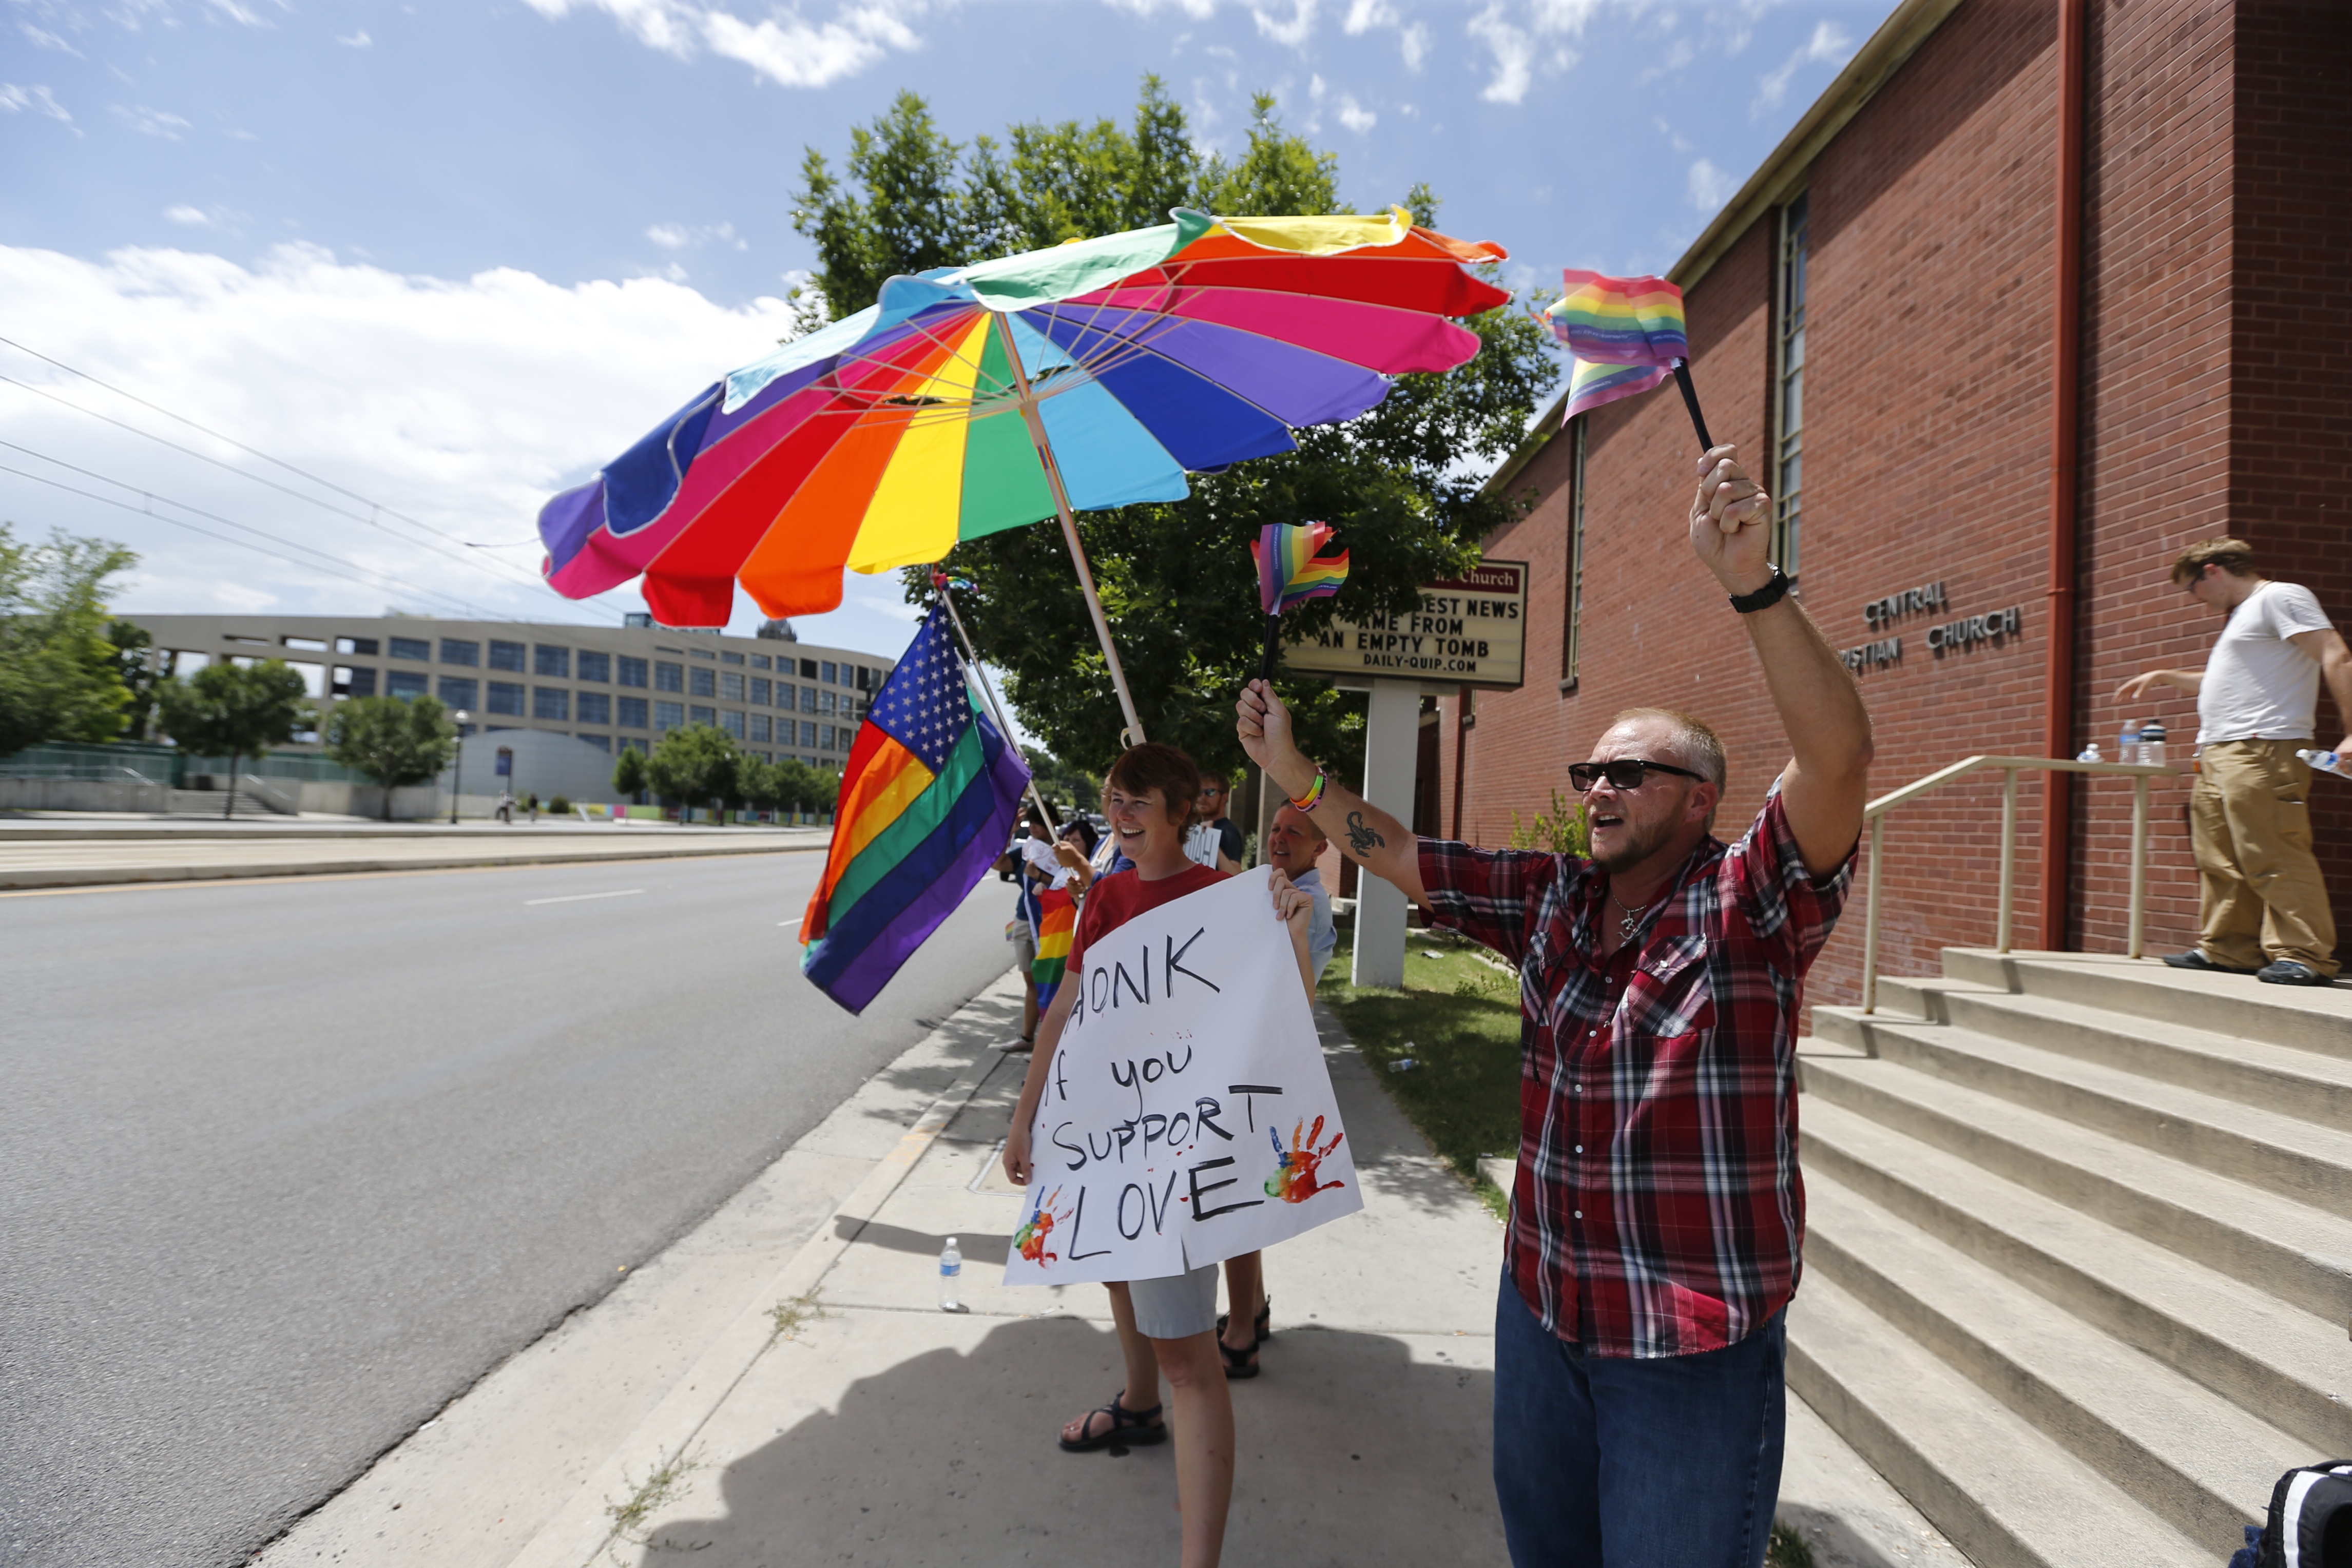 Dayne Law (R) and several others wave flags and cheer outside the Utah Pride Center after the 10th Circuit Court in Denver ruled and upheld same sex marriage in Utah on June 25, 2014 in Salt Lake City, Utah. (George Frey&mdash;Getty Images)